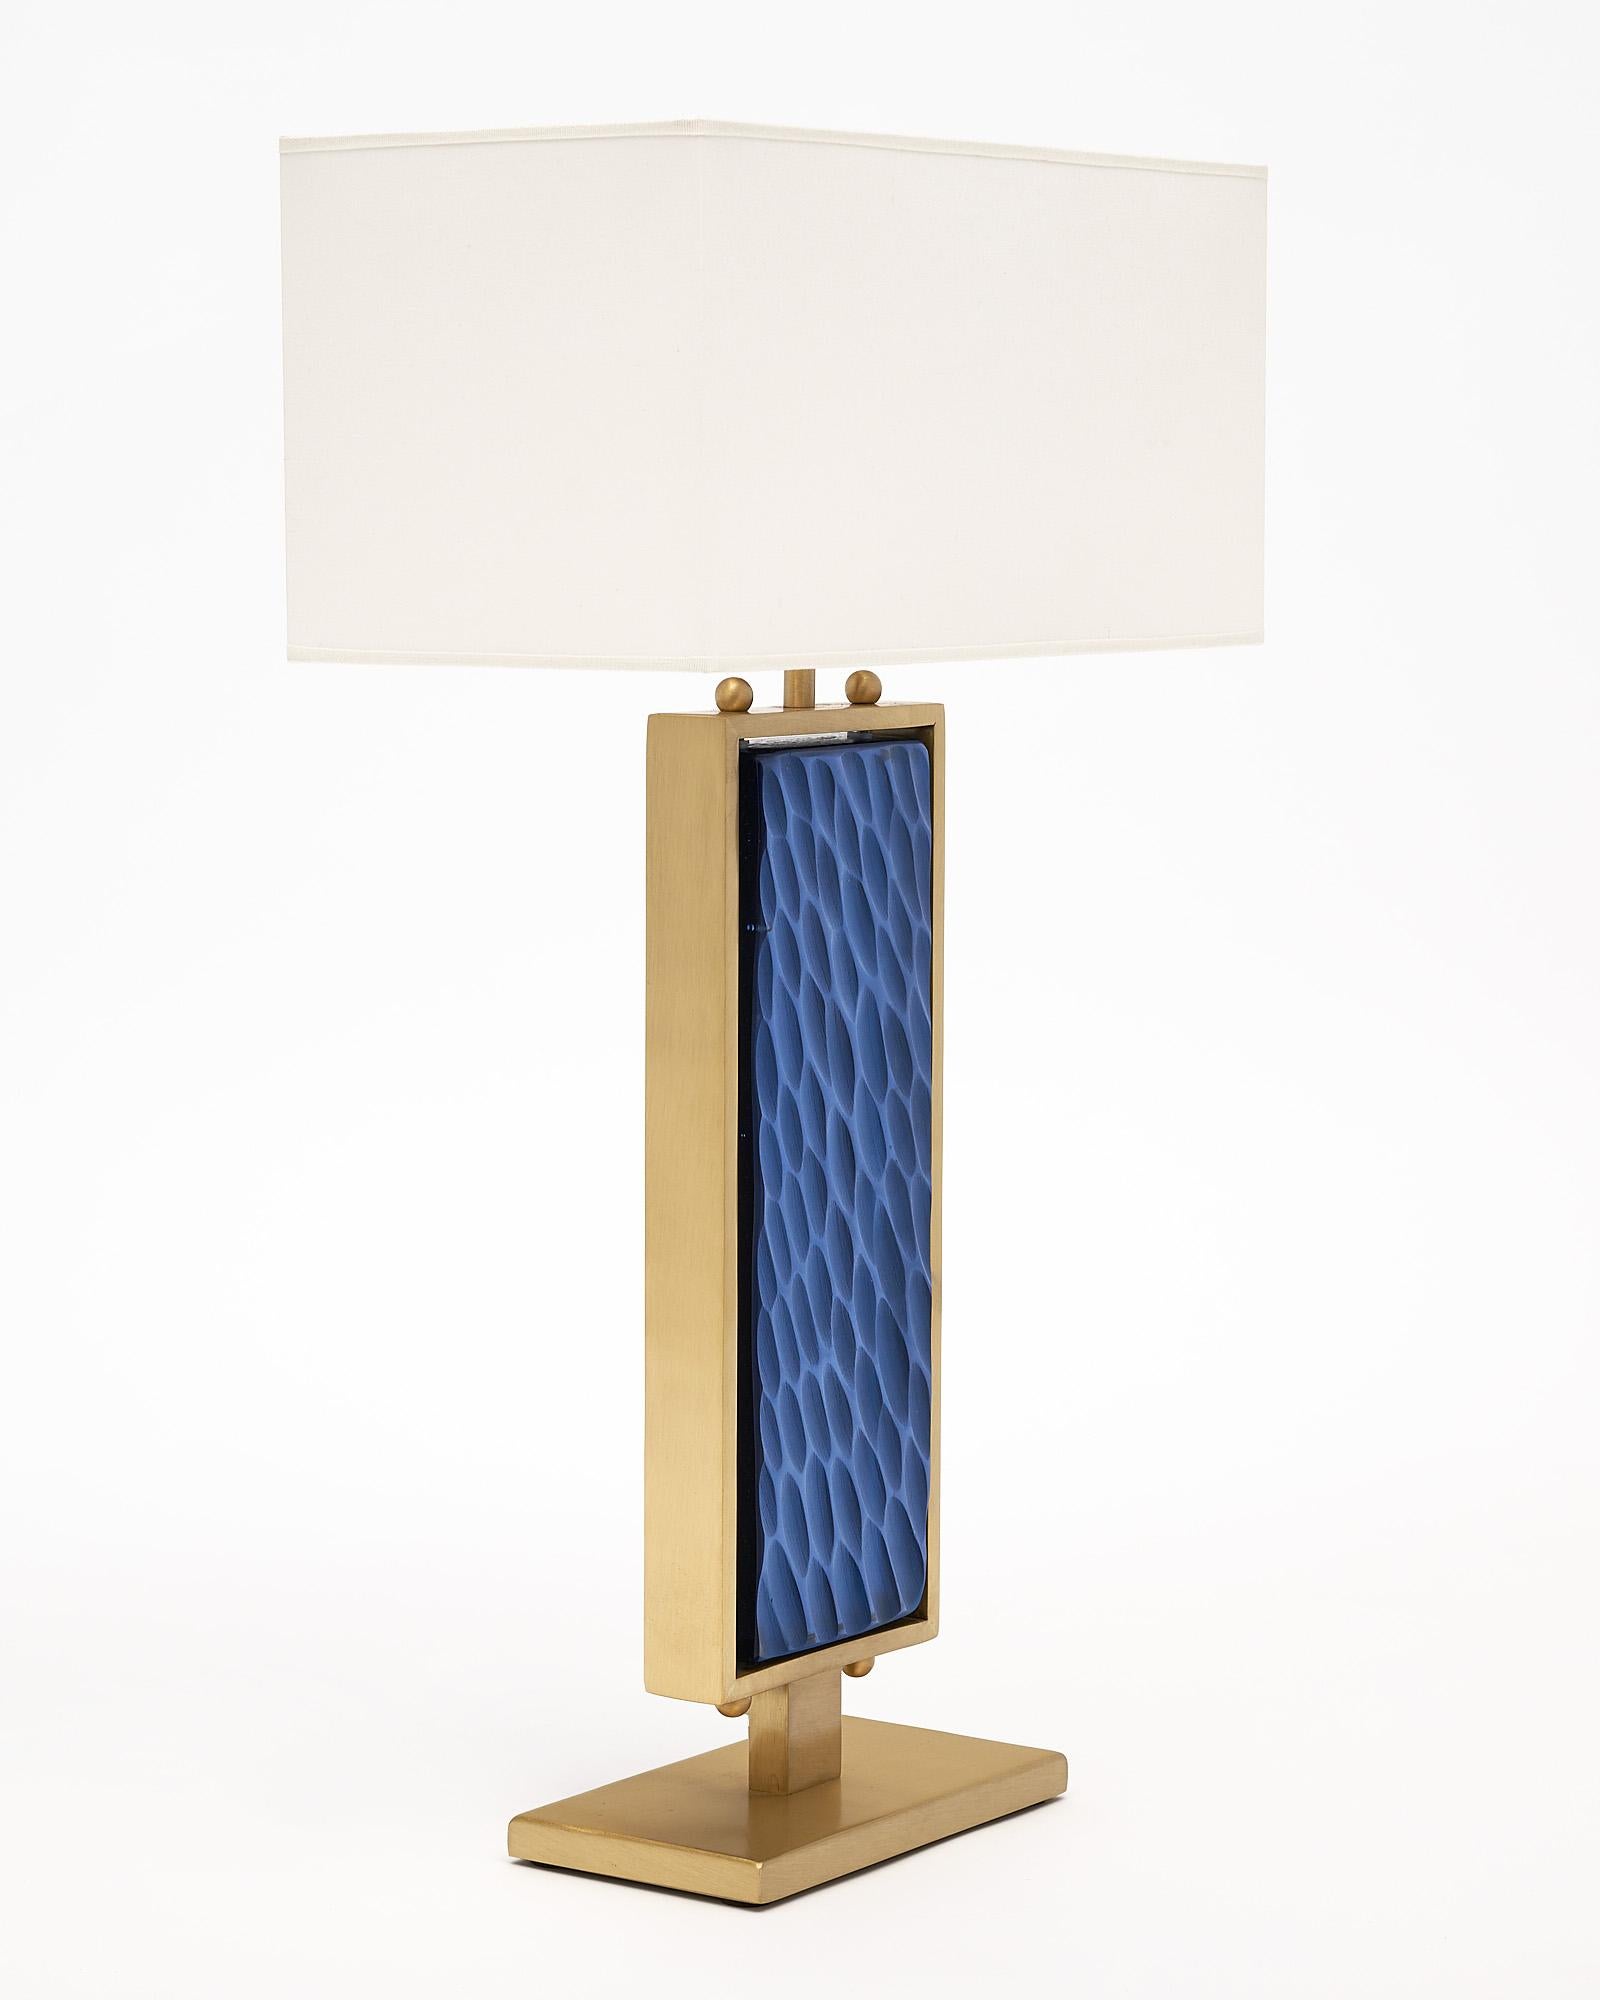 Murano glass in a blue hue and solid brass make these beautiful table lamps so stunning. With rectangular bases, the opaque blue colored glass is surrounded by brass, and light is able to pass through the glass in remarkable ways. The glass is